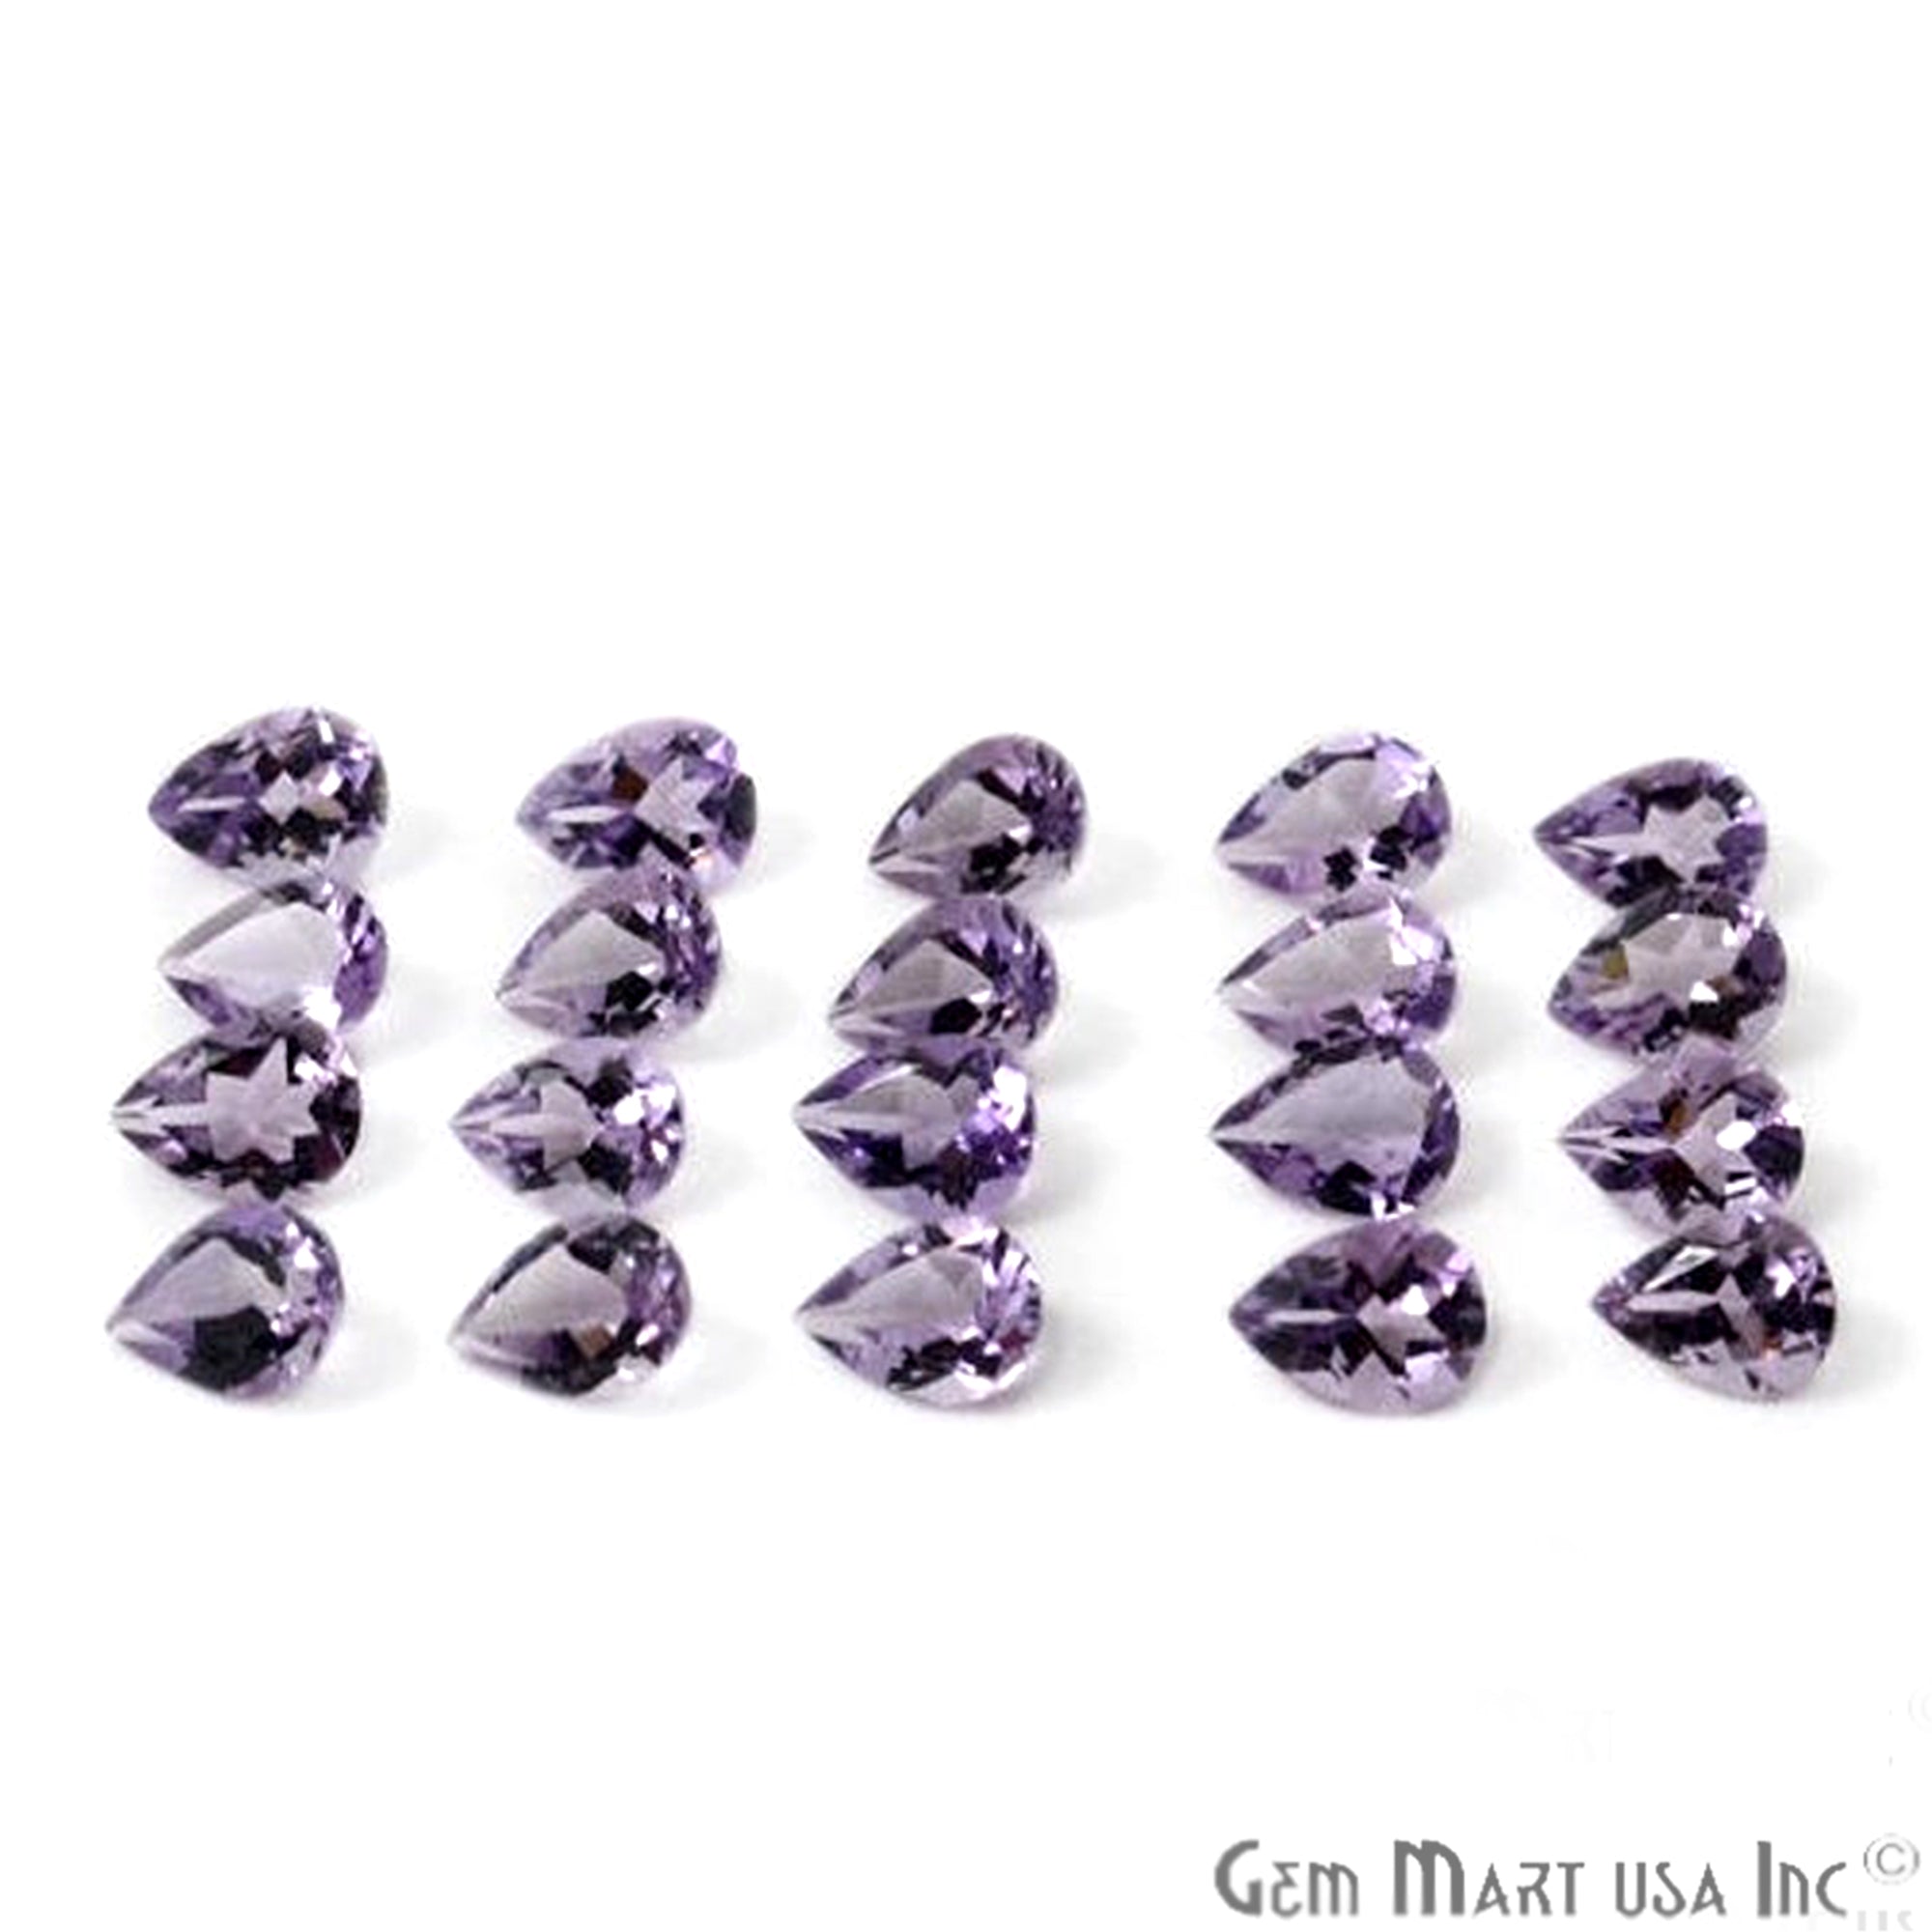 20 cts Amethyst Pears 6x8, Loose Faceted Stone, Amethyst Mix, Amazing Cut and Quality - GemMartUSA